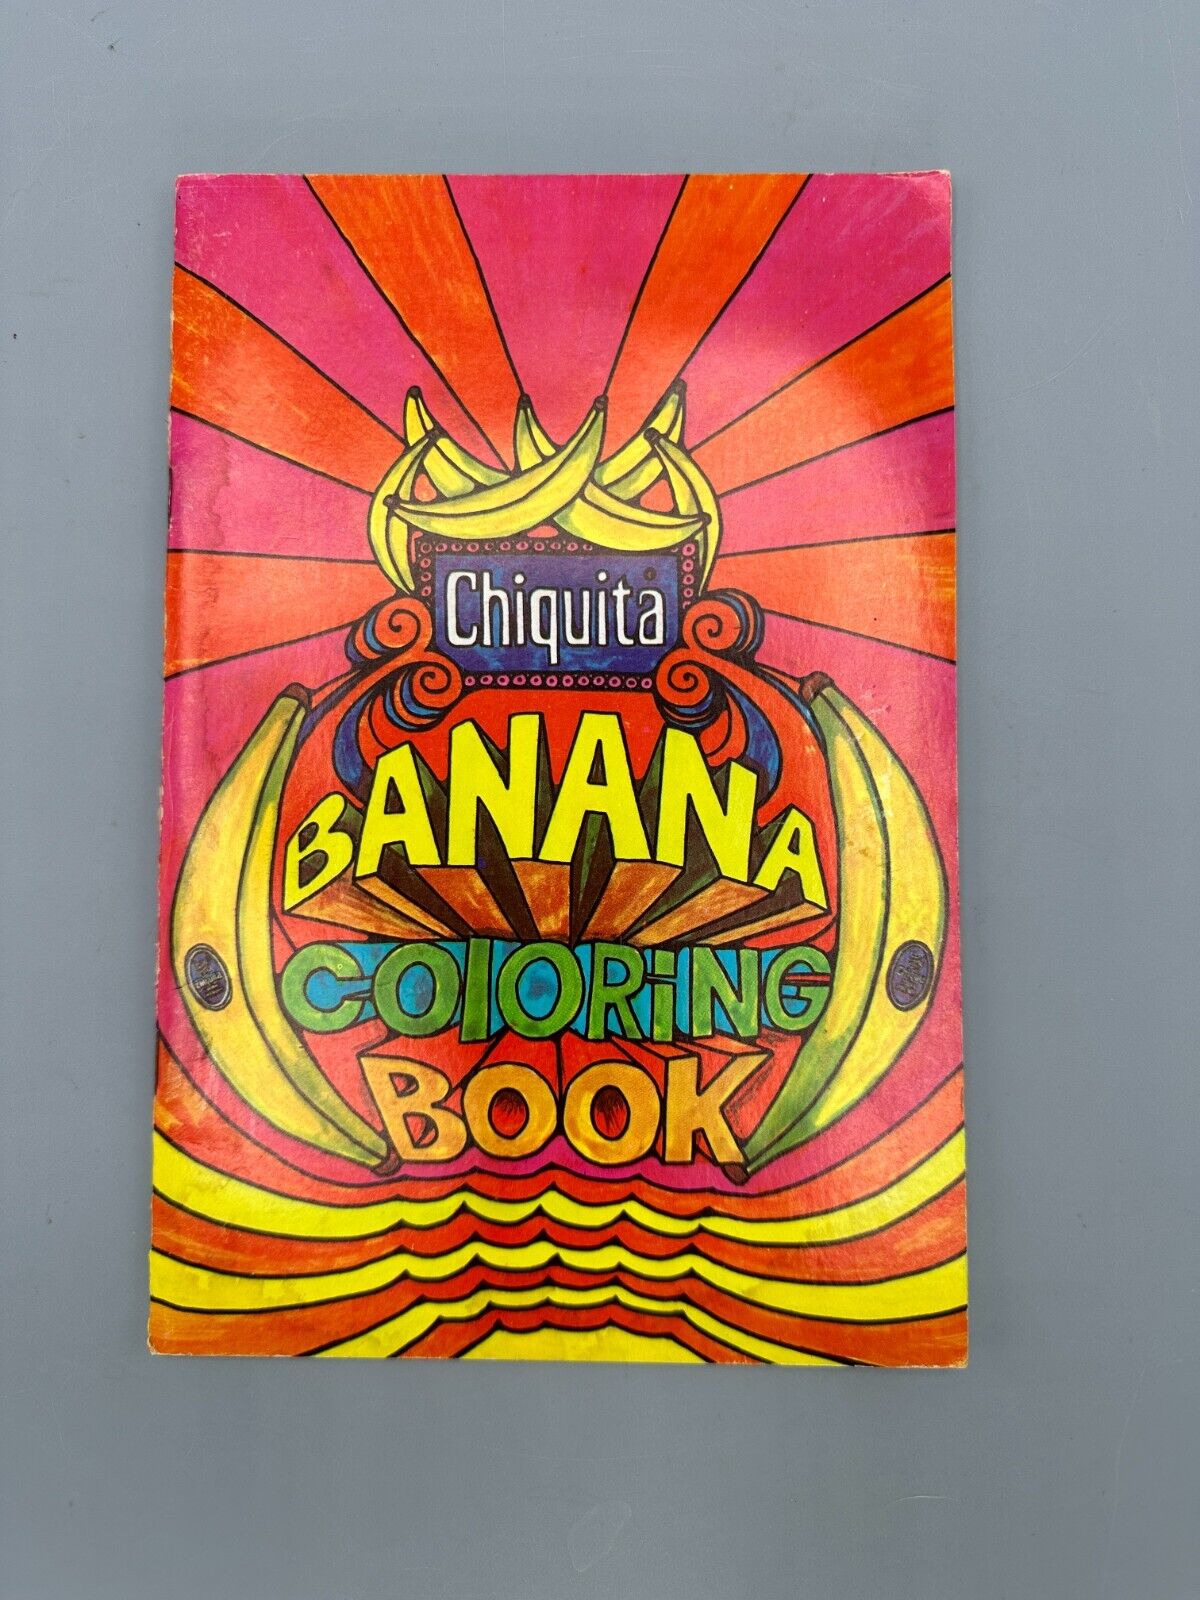 Vintage 1970 Chiquita Banana Coloring Book Advertisement Not Used